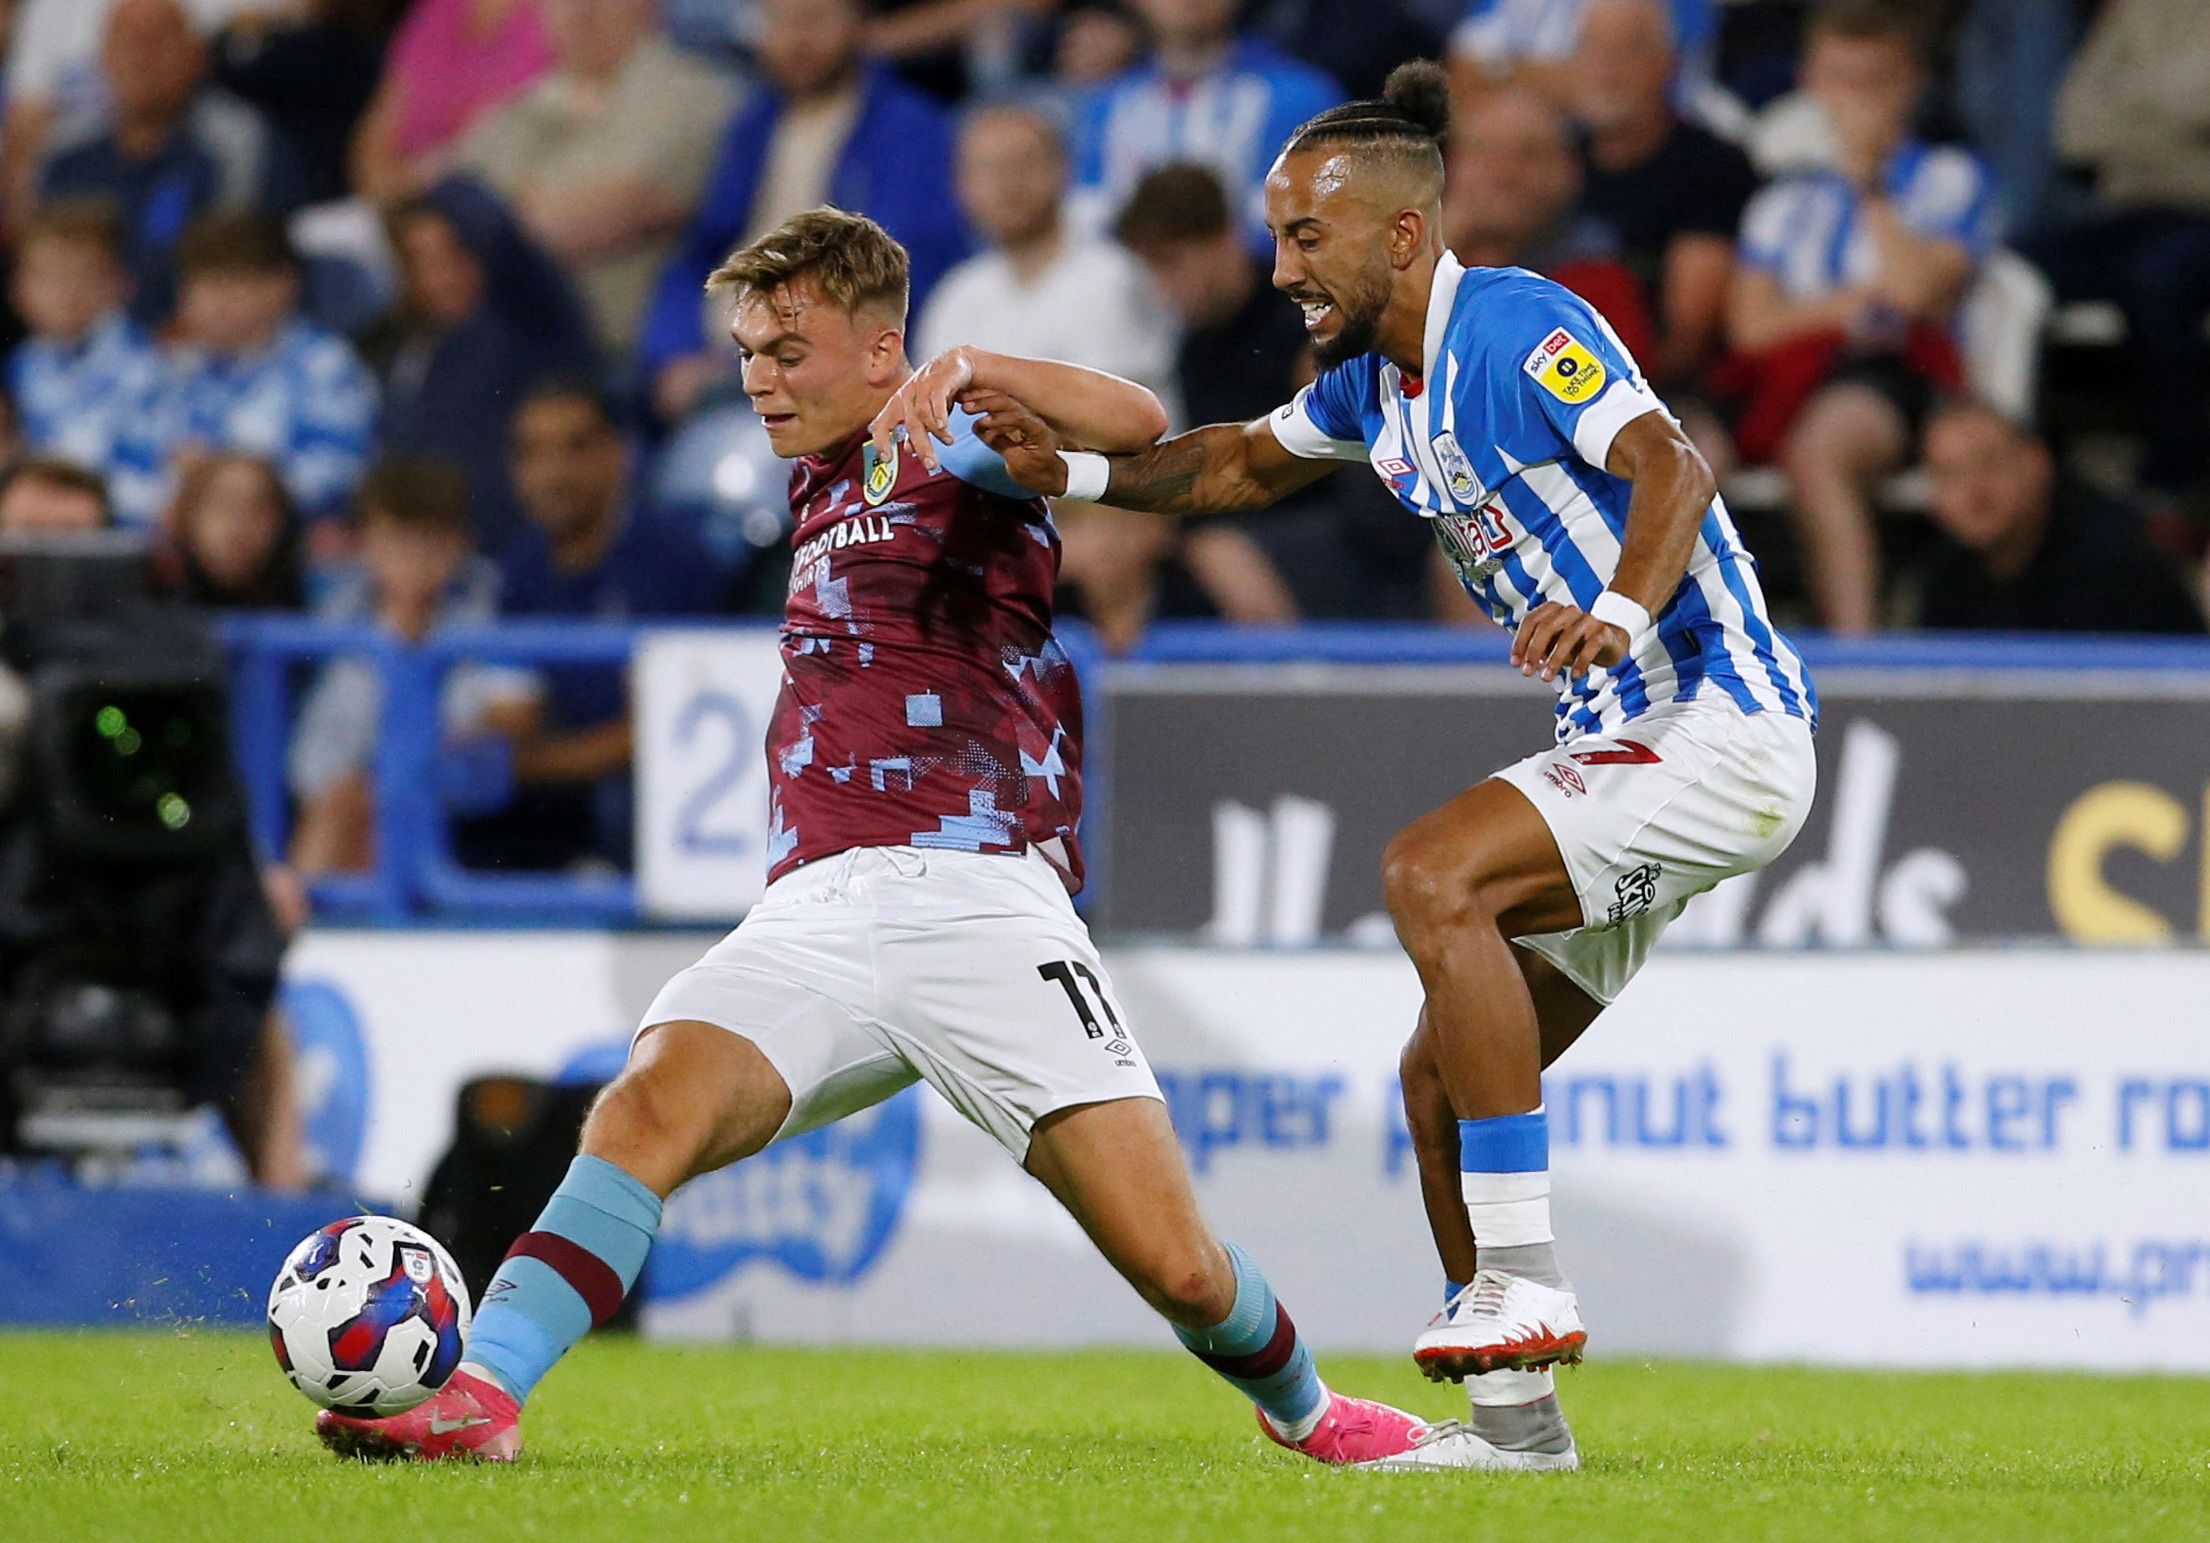 Soccer Football - Championship - Huddersfield Town v Burnley - John Smith's Stadium, Huddersfield, Britain - July 29, 2022 Burnley's Scott Twine in action with Huddersfield Town's Sorba Thomas  Action Images/Ed Sykes  EDITORIAL USE ONLY. No use with unauthorized audio, video, data, fixture lists, club/league logos or 